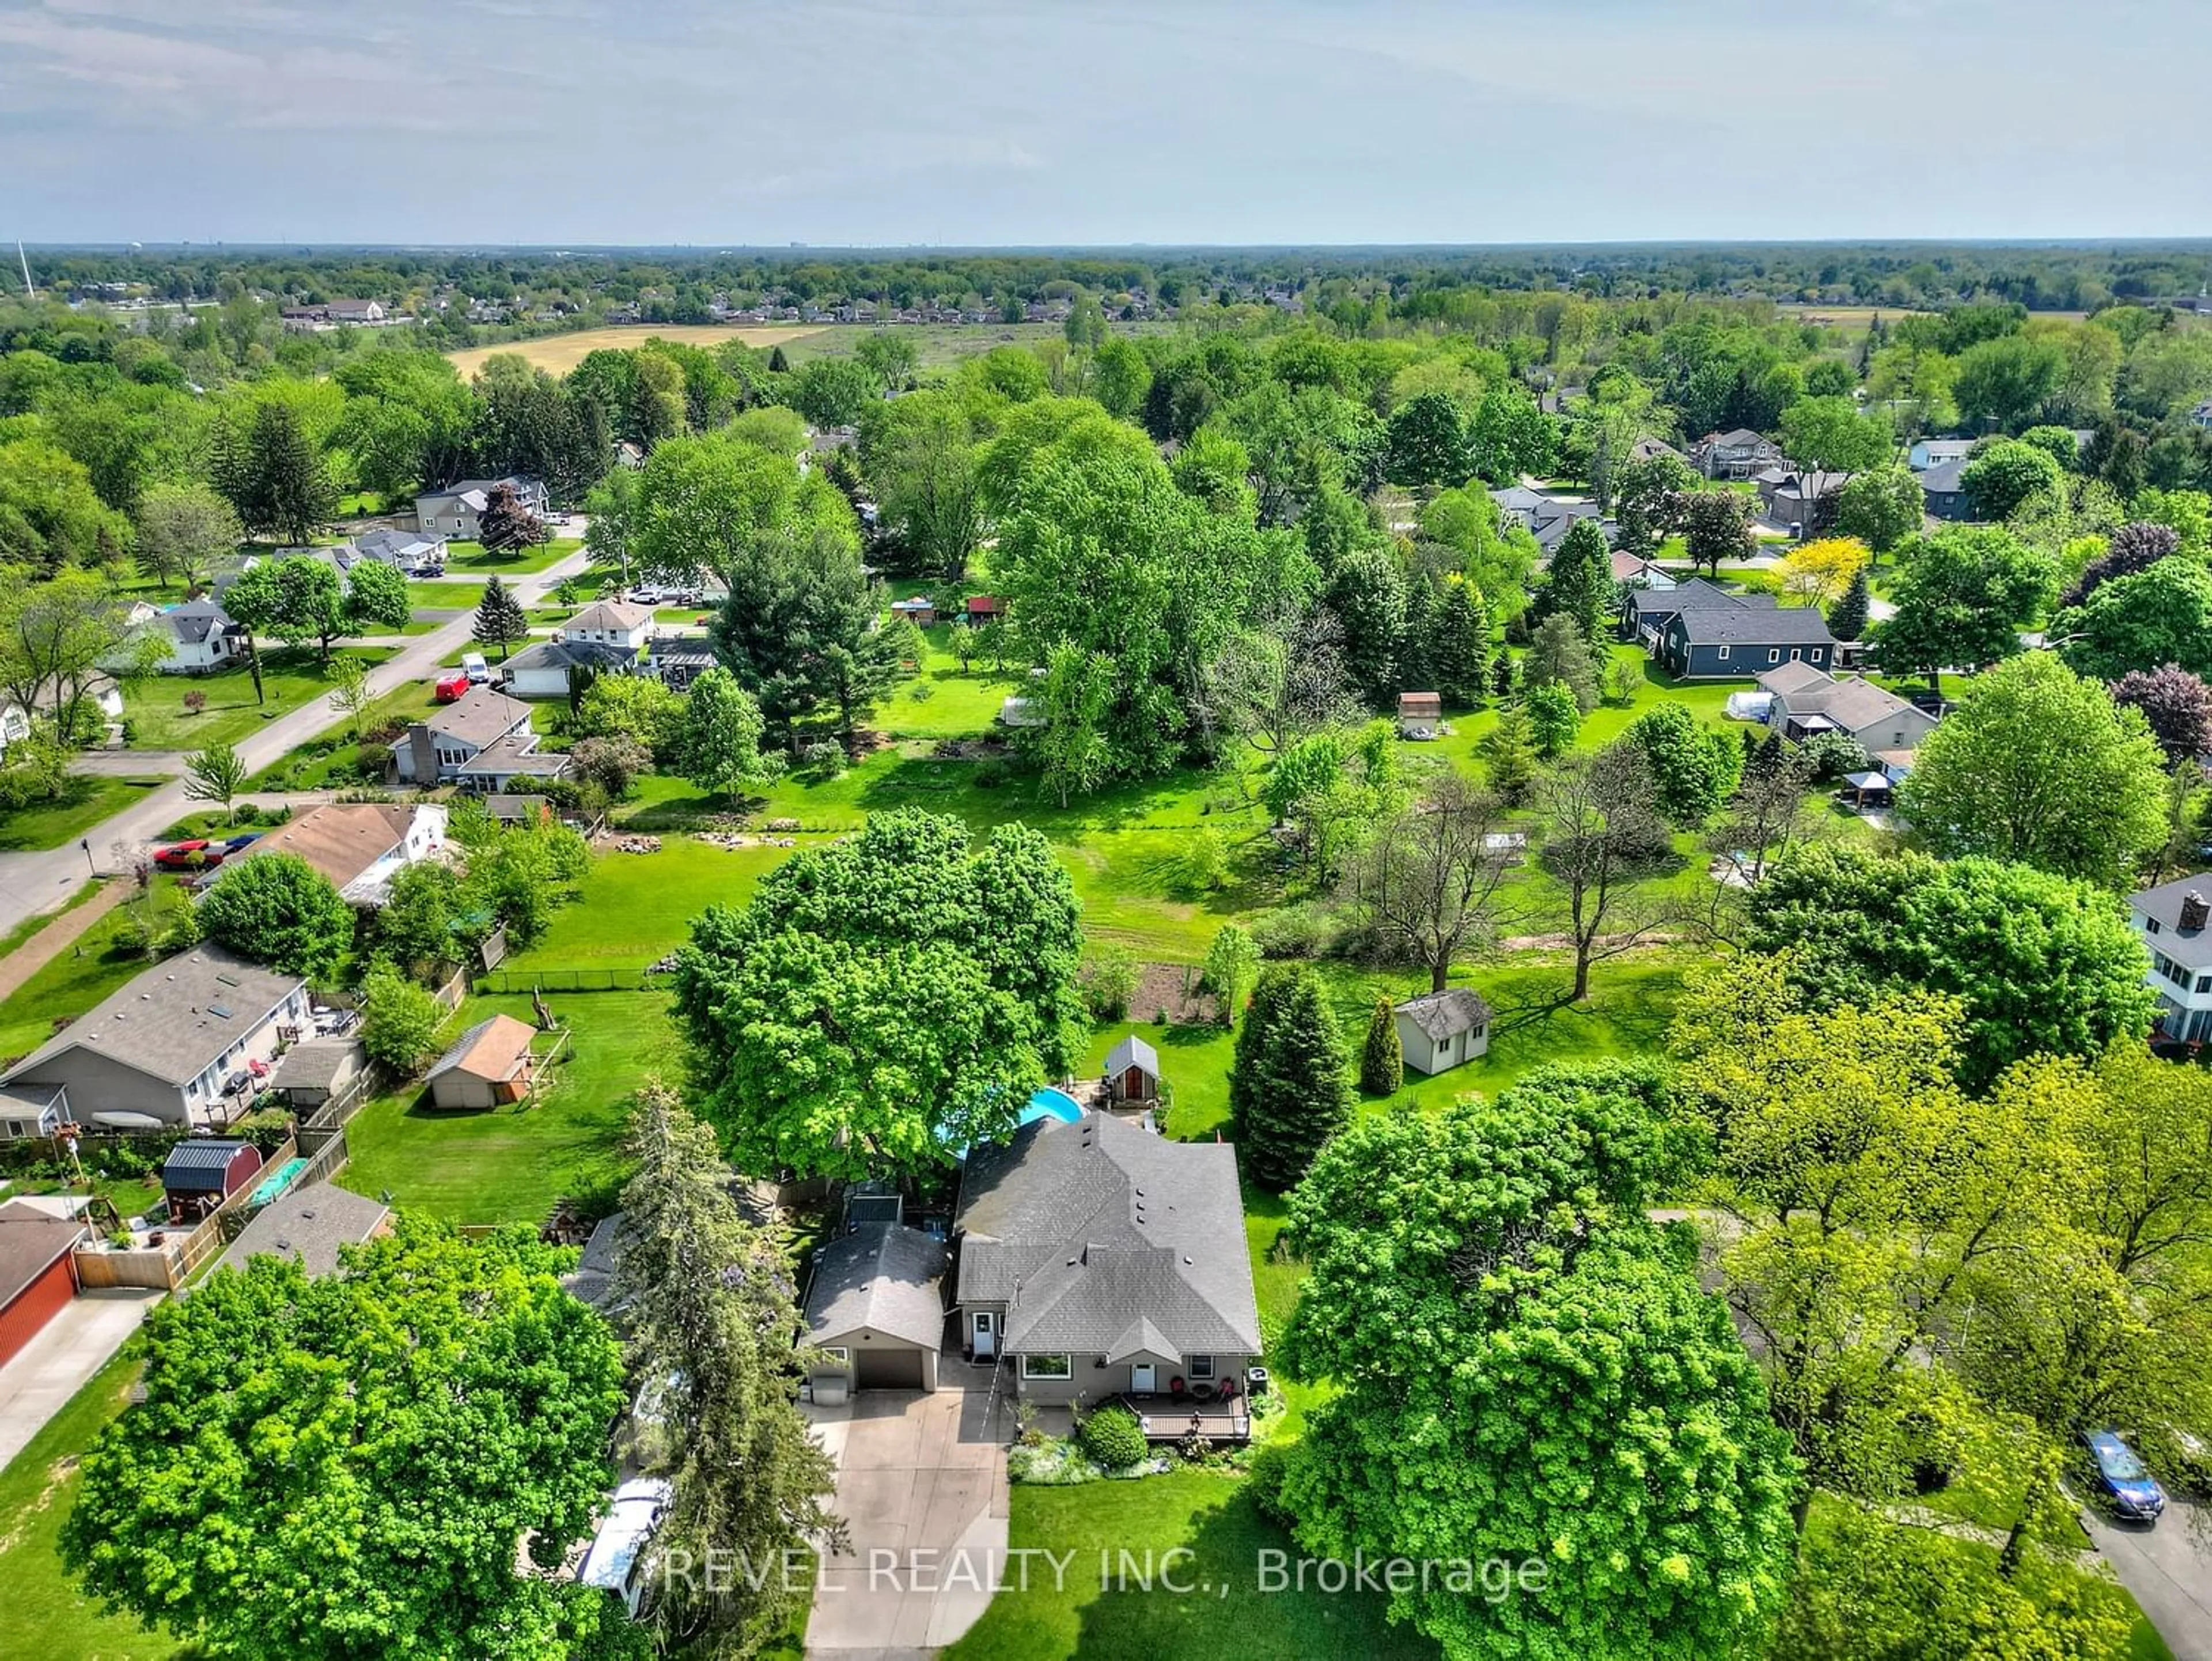 Lakeview for 35 Summerlea Ave, Welland Ontario L3C 3E8